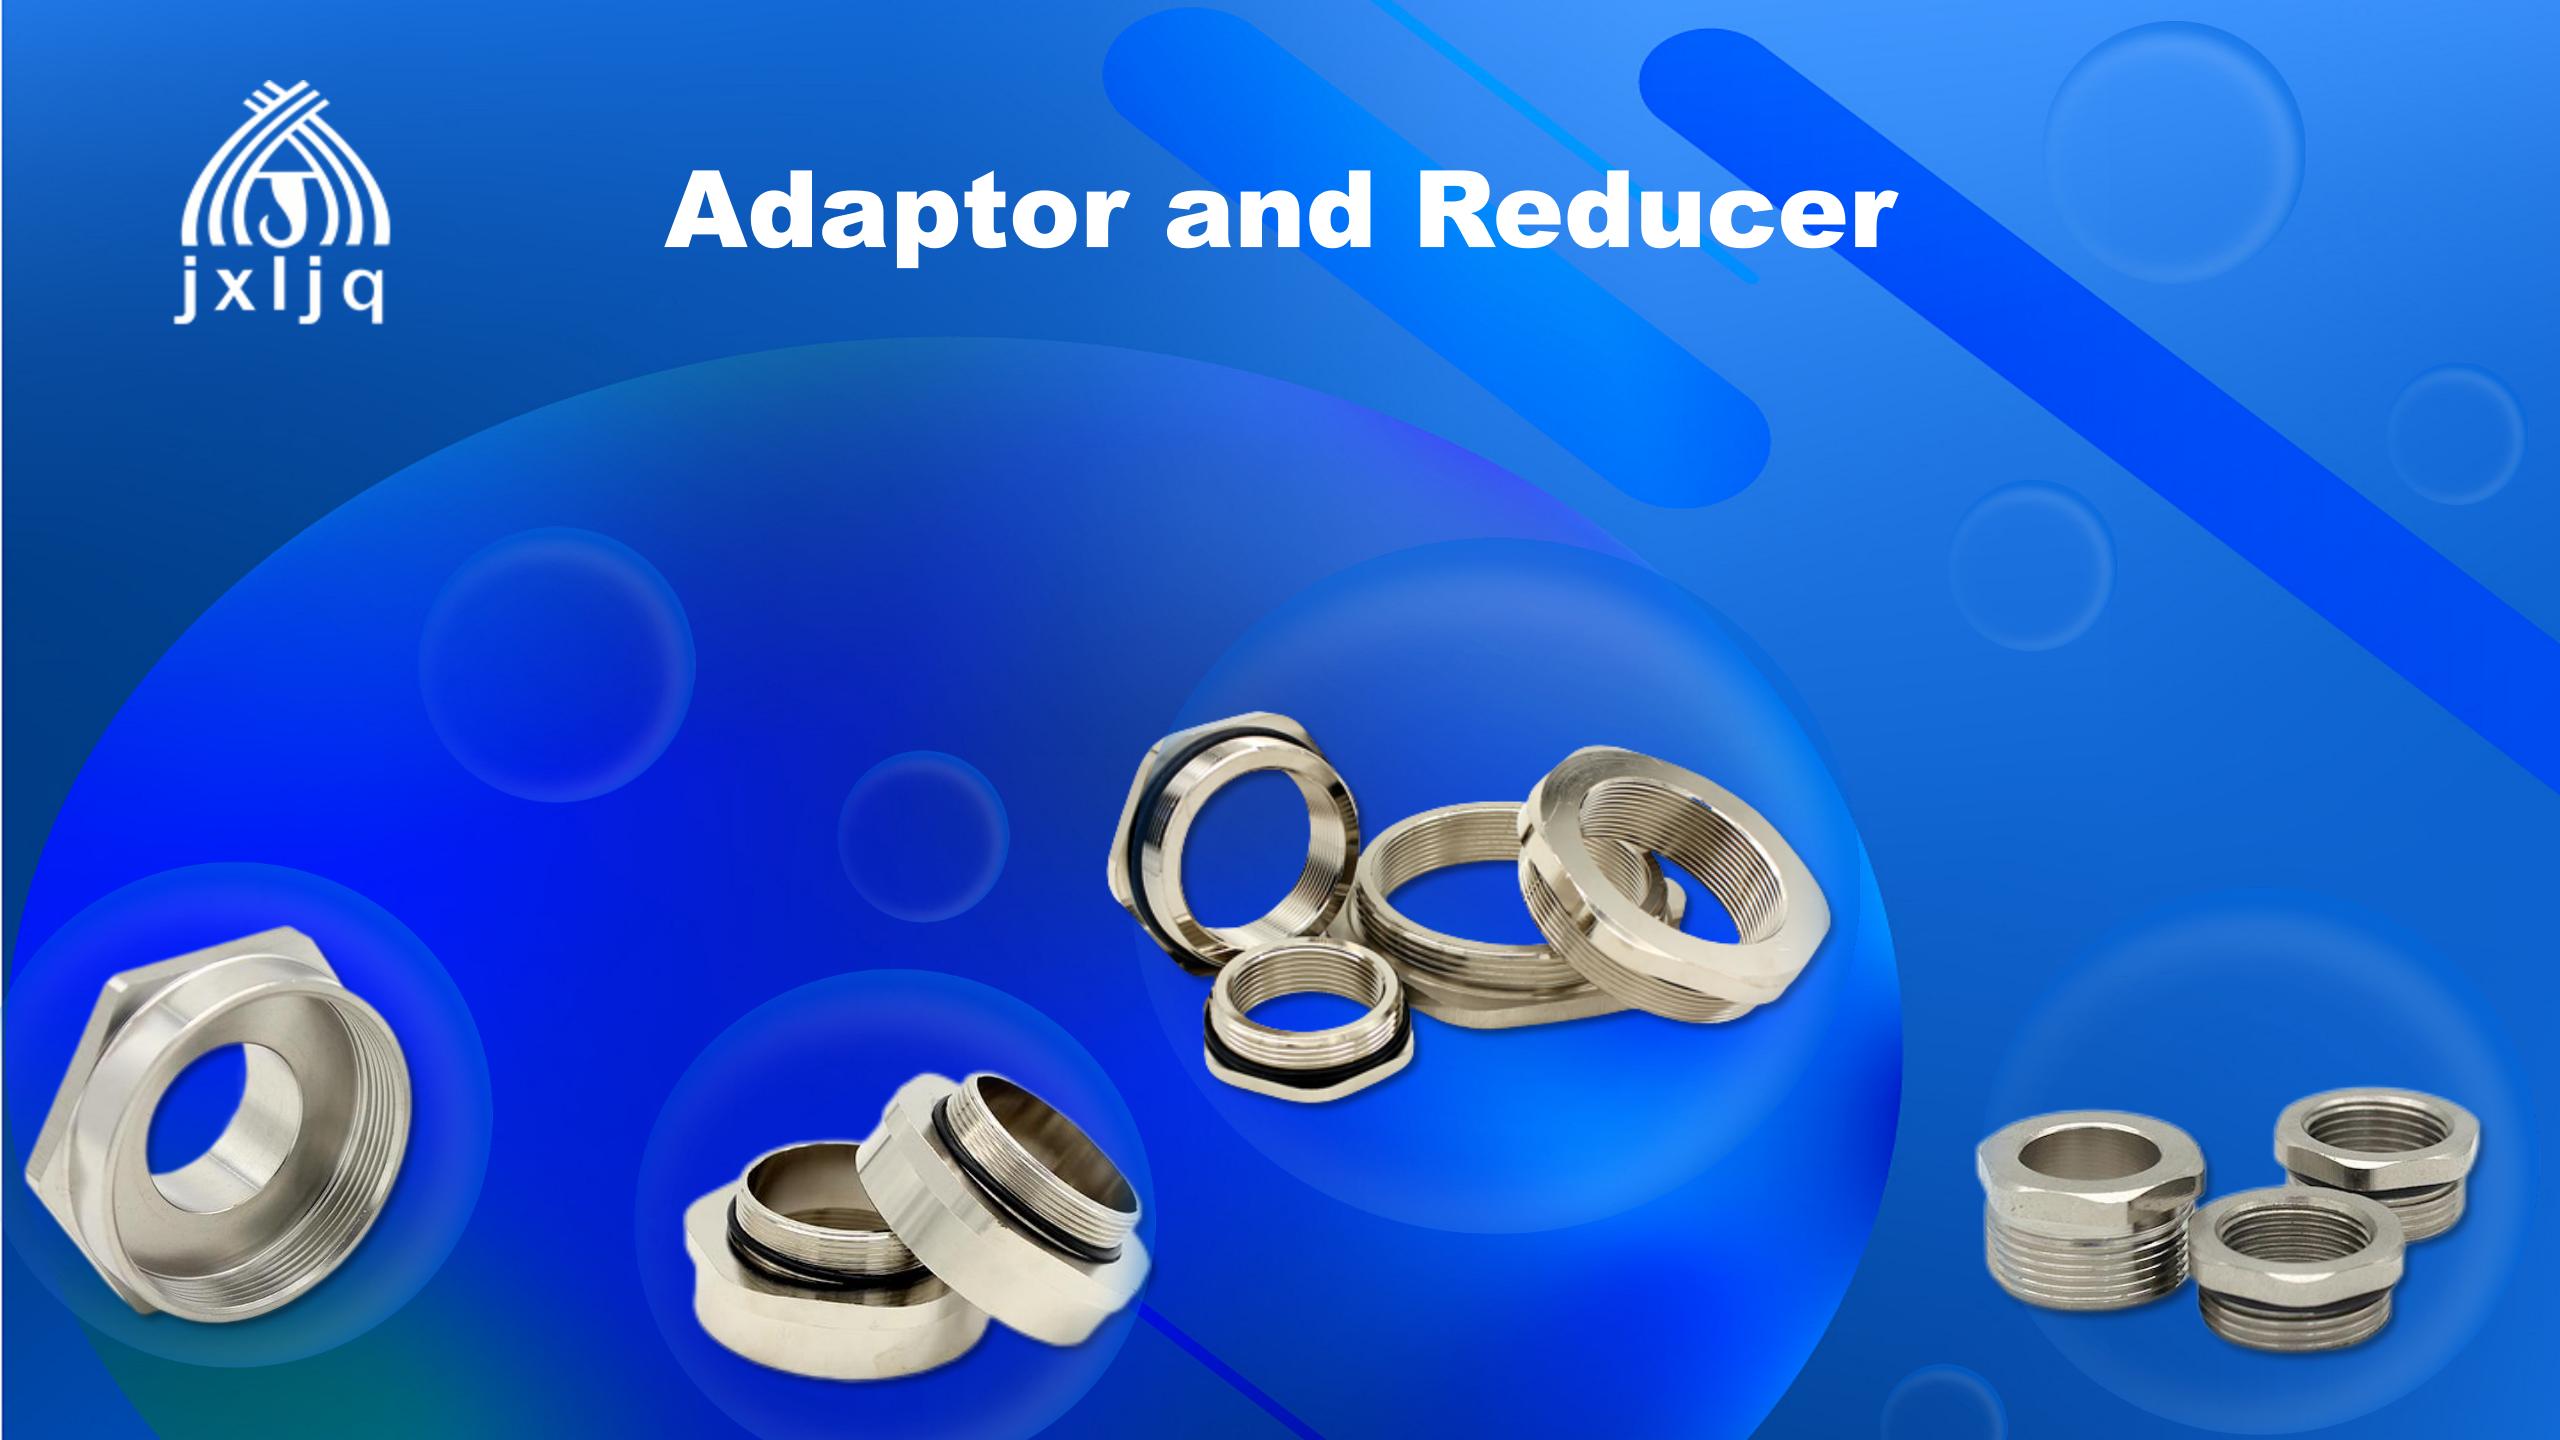 Why use an adaptor or reducer?